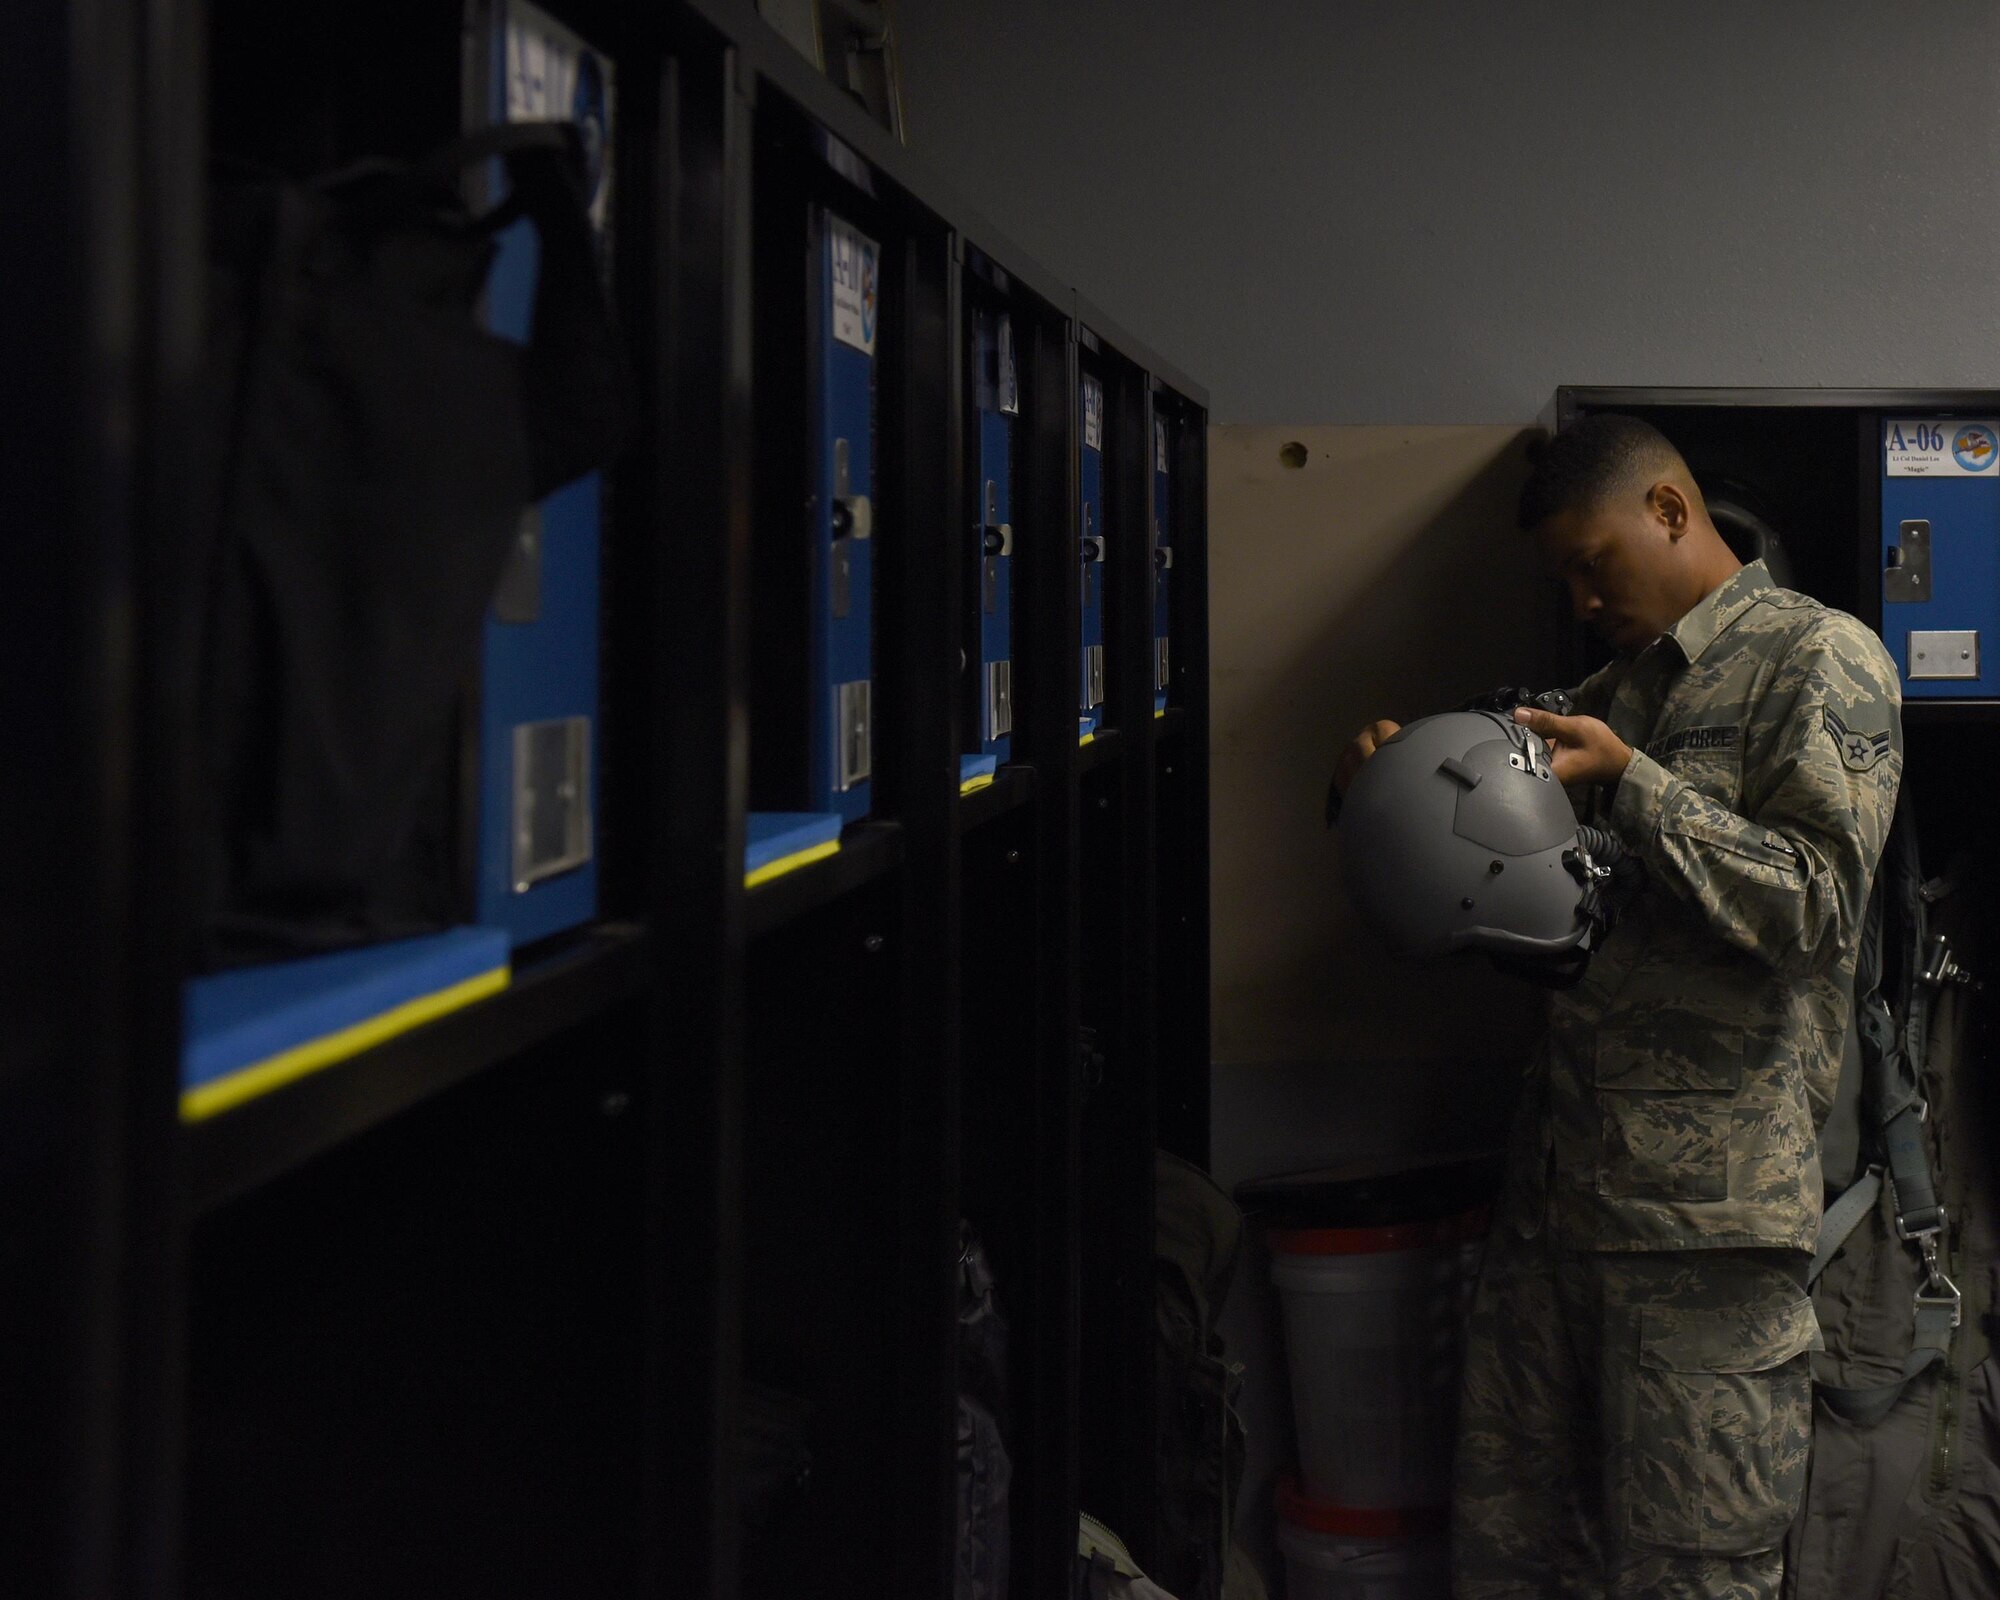 U.S. Air Force Airman 1st Class Donvin Farquharson, 325th Operations Support Group aircrew flight equipment technician, performs the final inspection on a pilot’s helmet before clearing it for use at Tyndall Air Force Base, Fla., Feb. 1, 2017. Aircrew flight equipment technicians ensure that all flight and safety equipment is in perfect working order. (U.S. Air Force photo by Airman 1st Class Cody R. Miller/Released)